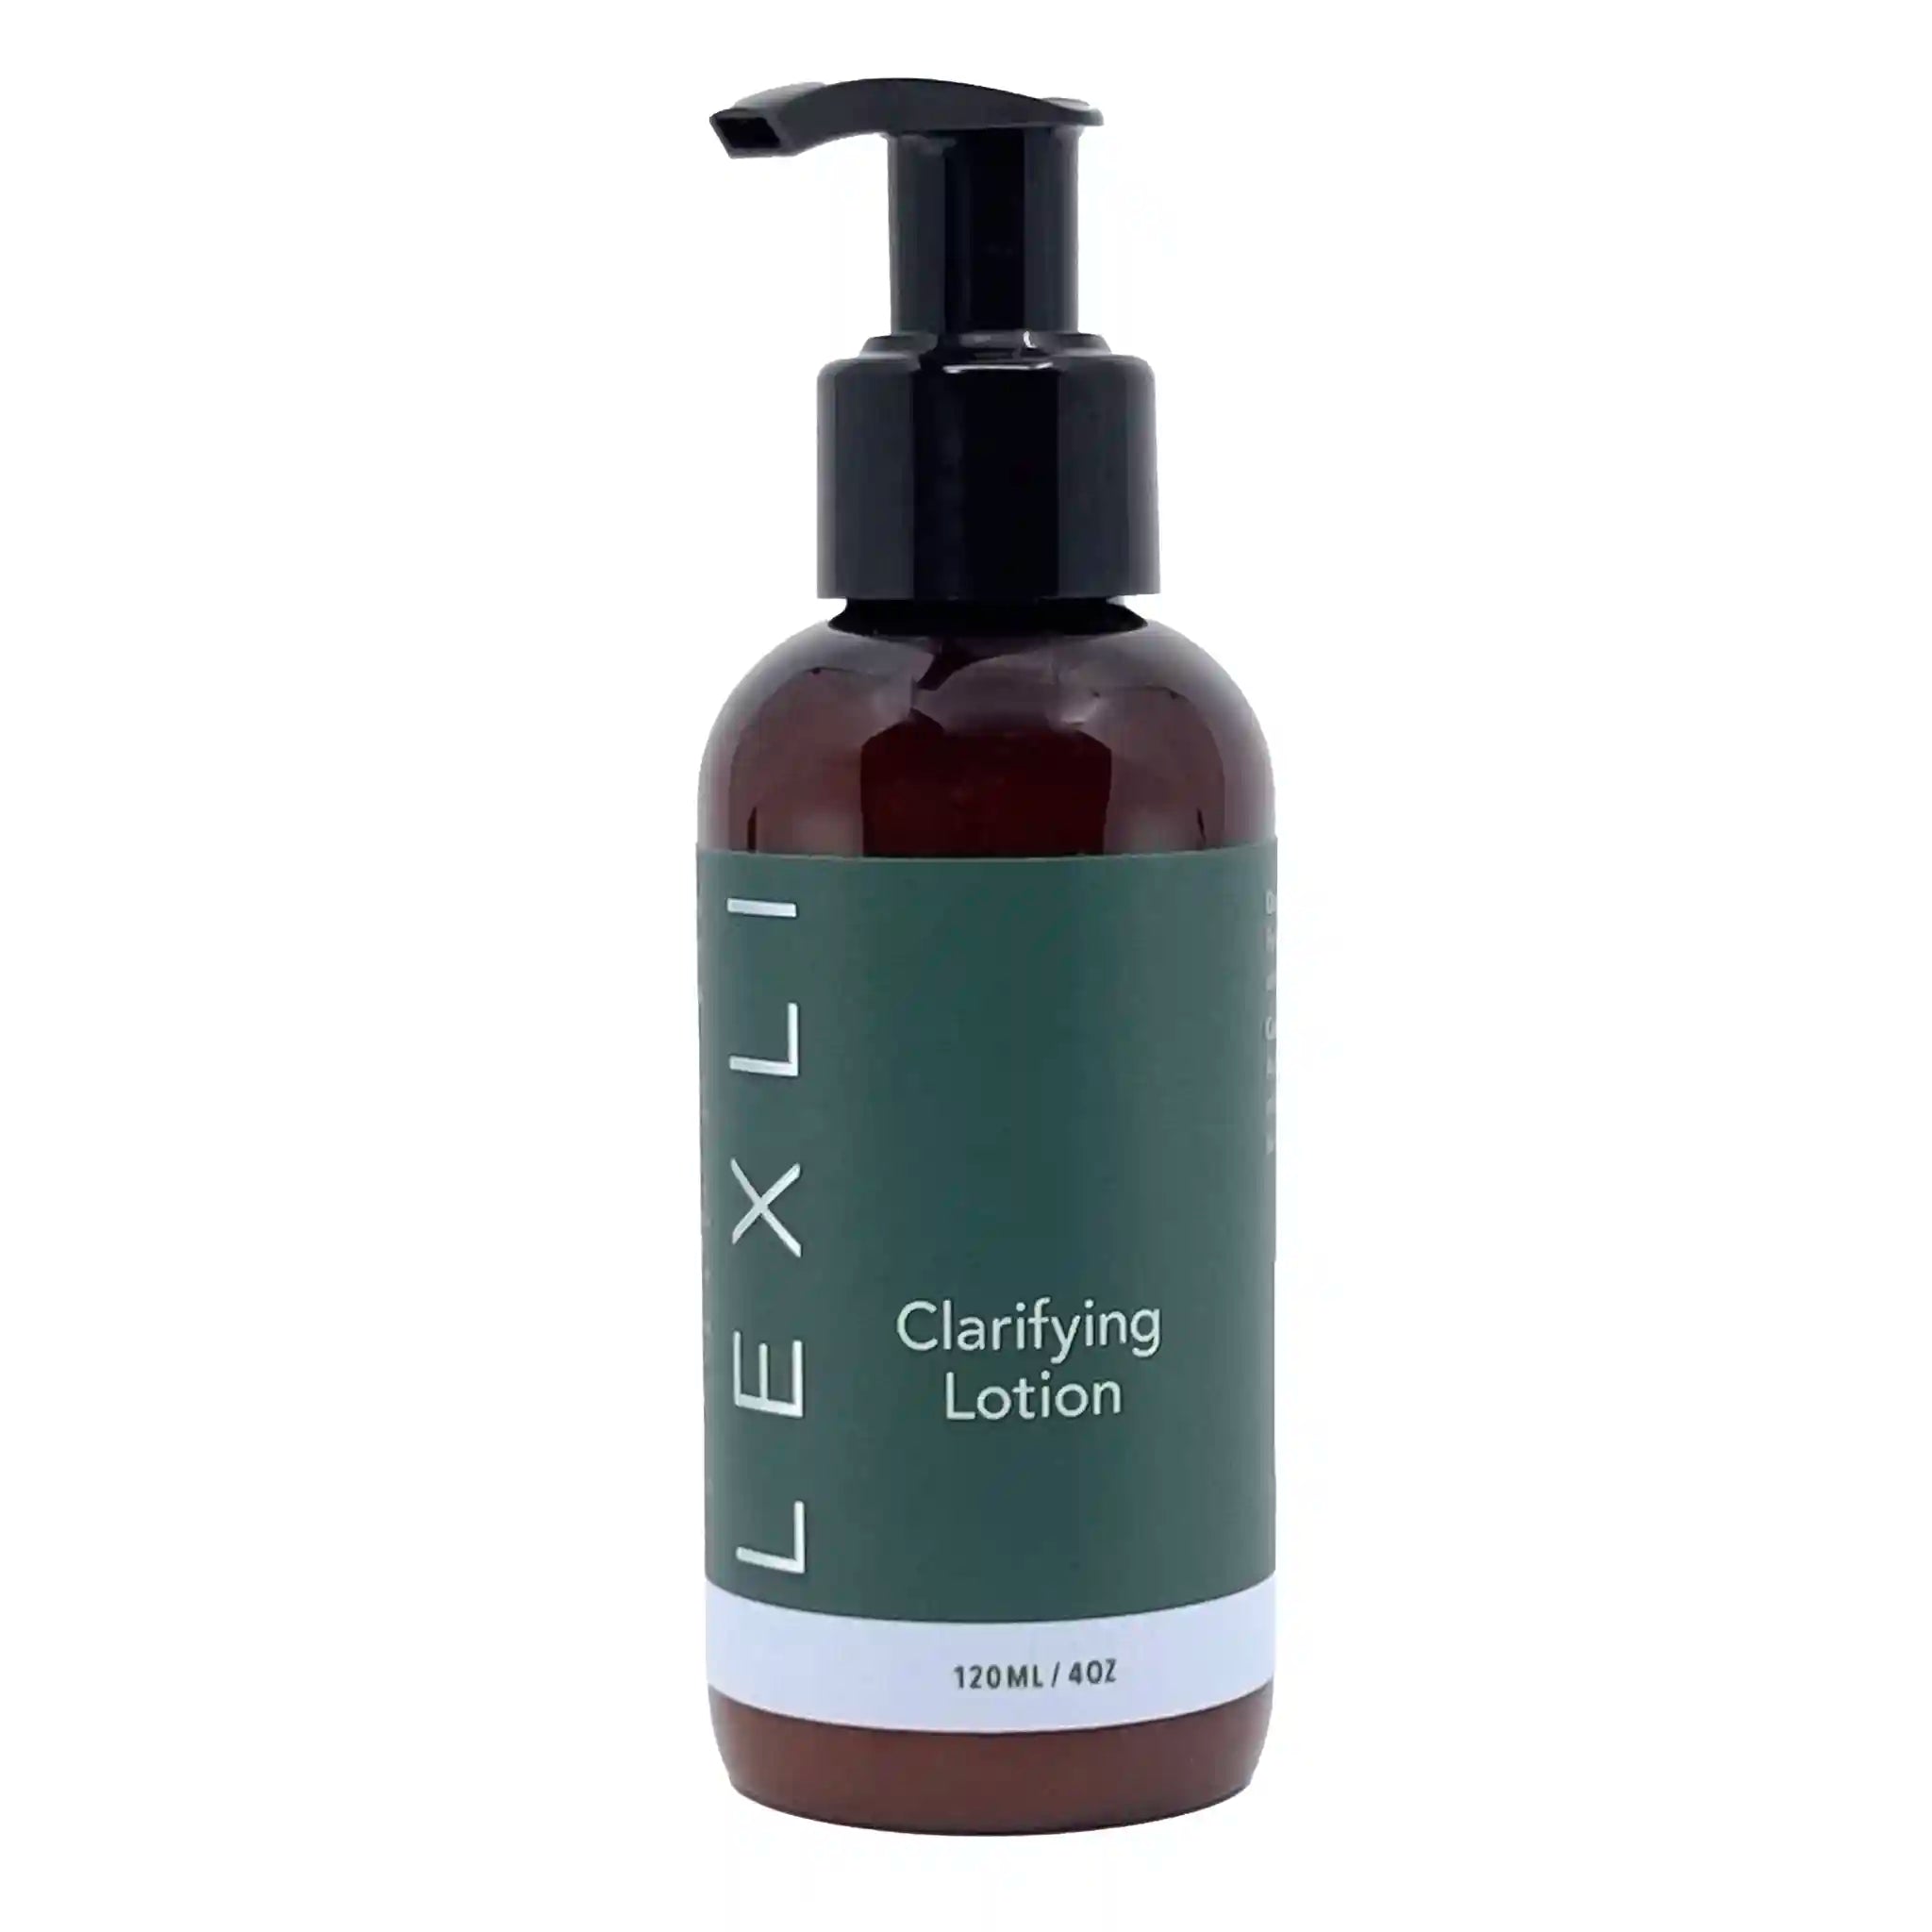 4 oz bottle with green label, Clarifying Lotion 